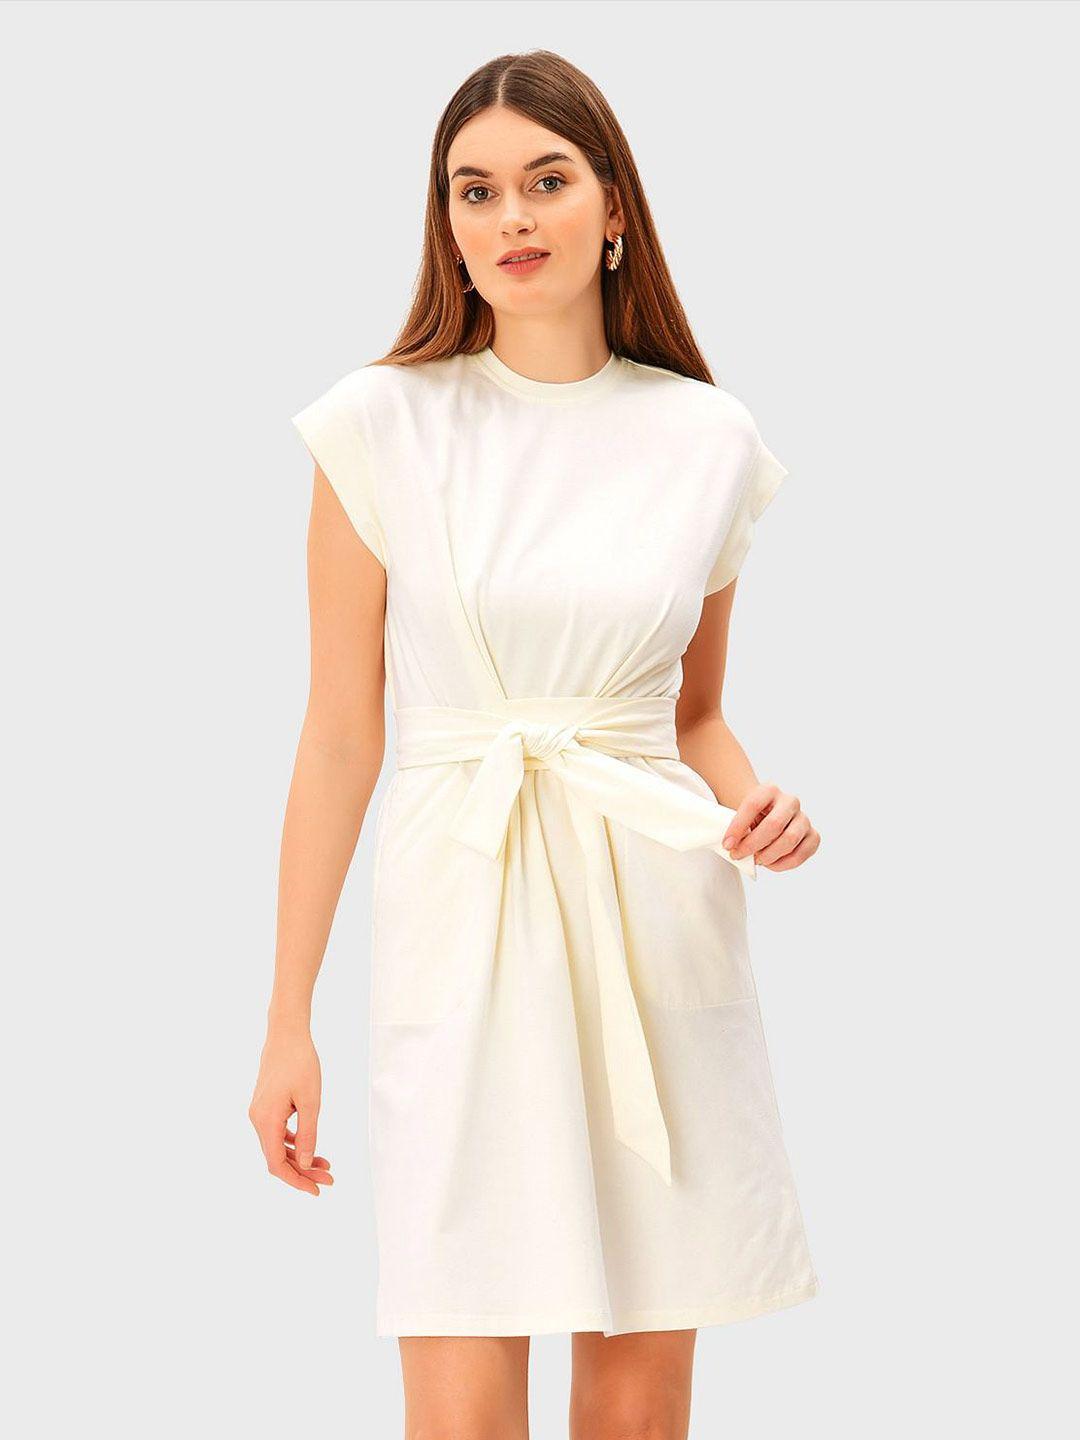 zapelle off white fit & flare dress